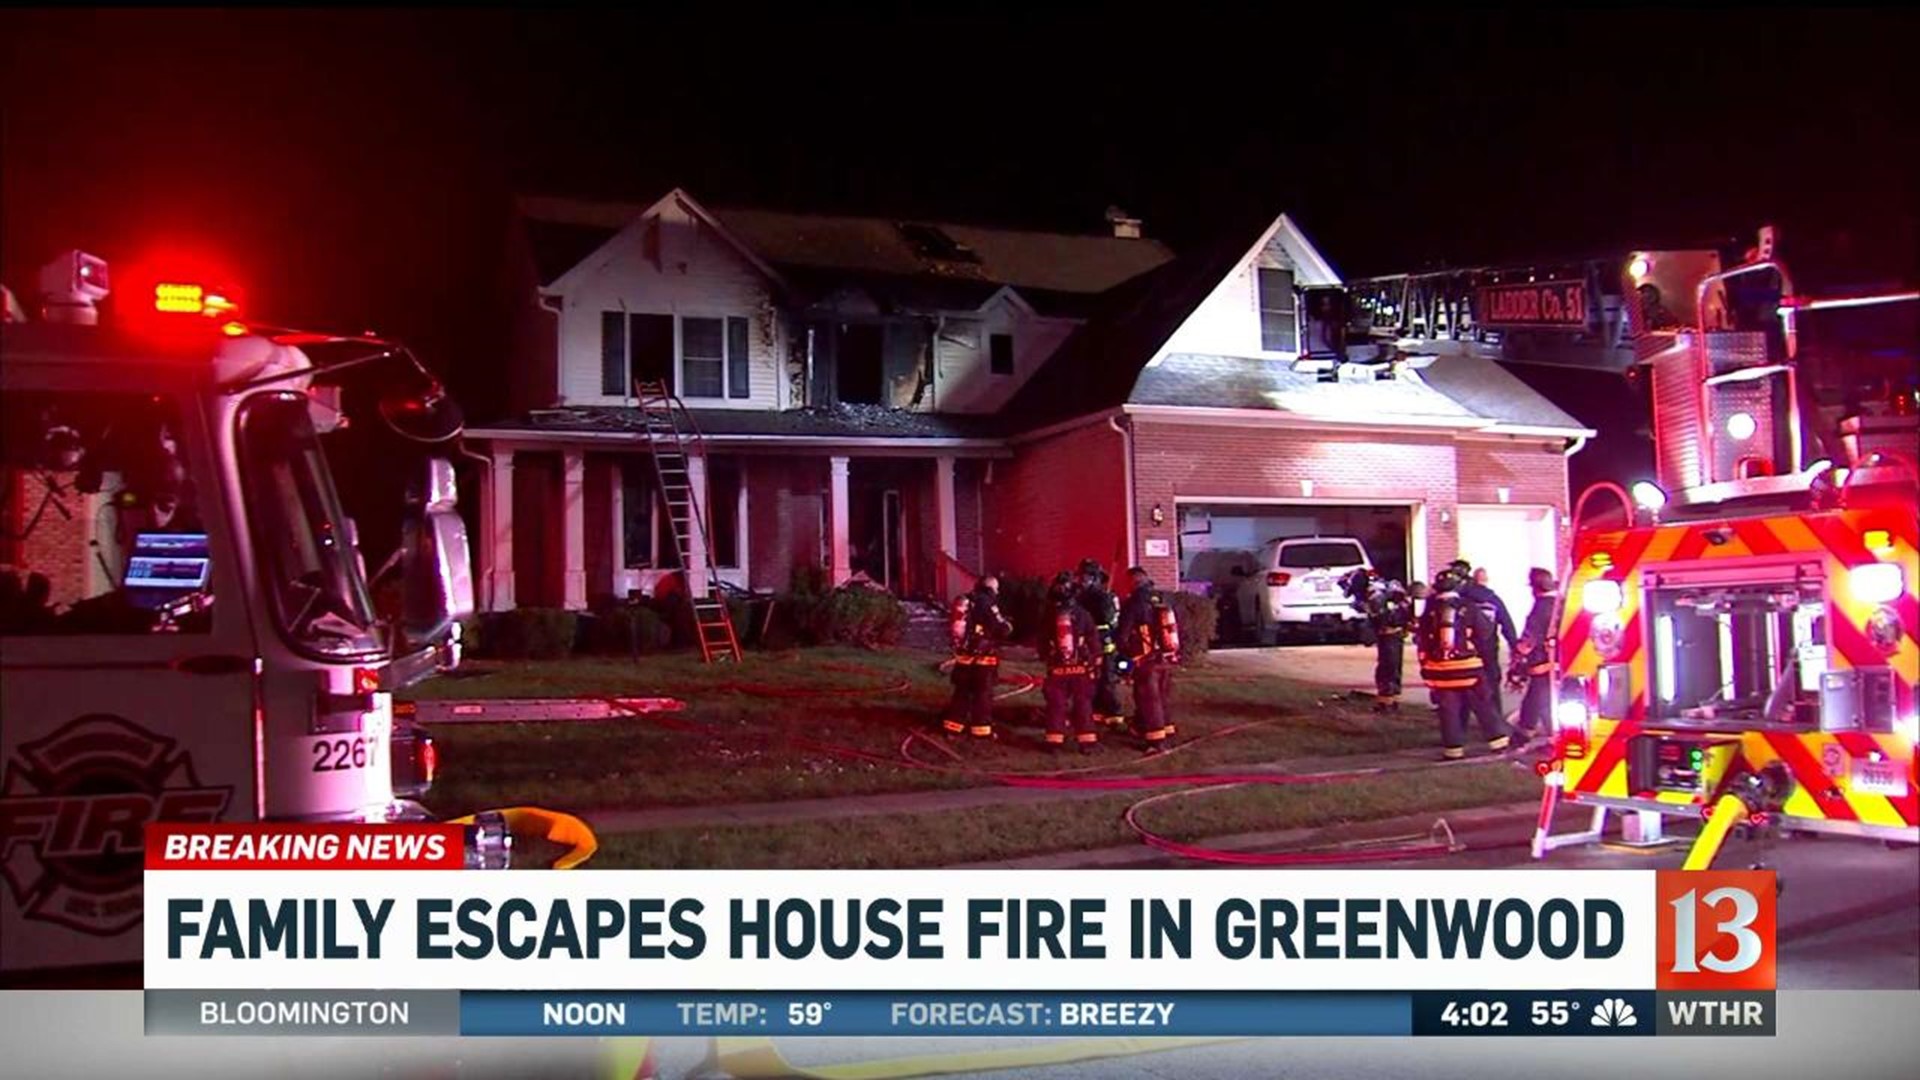 Greenwood fire under control after nearly an hour